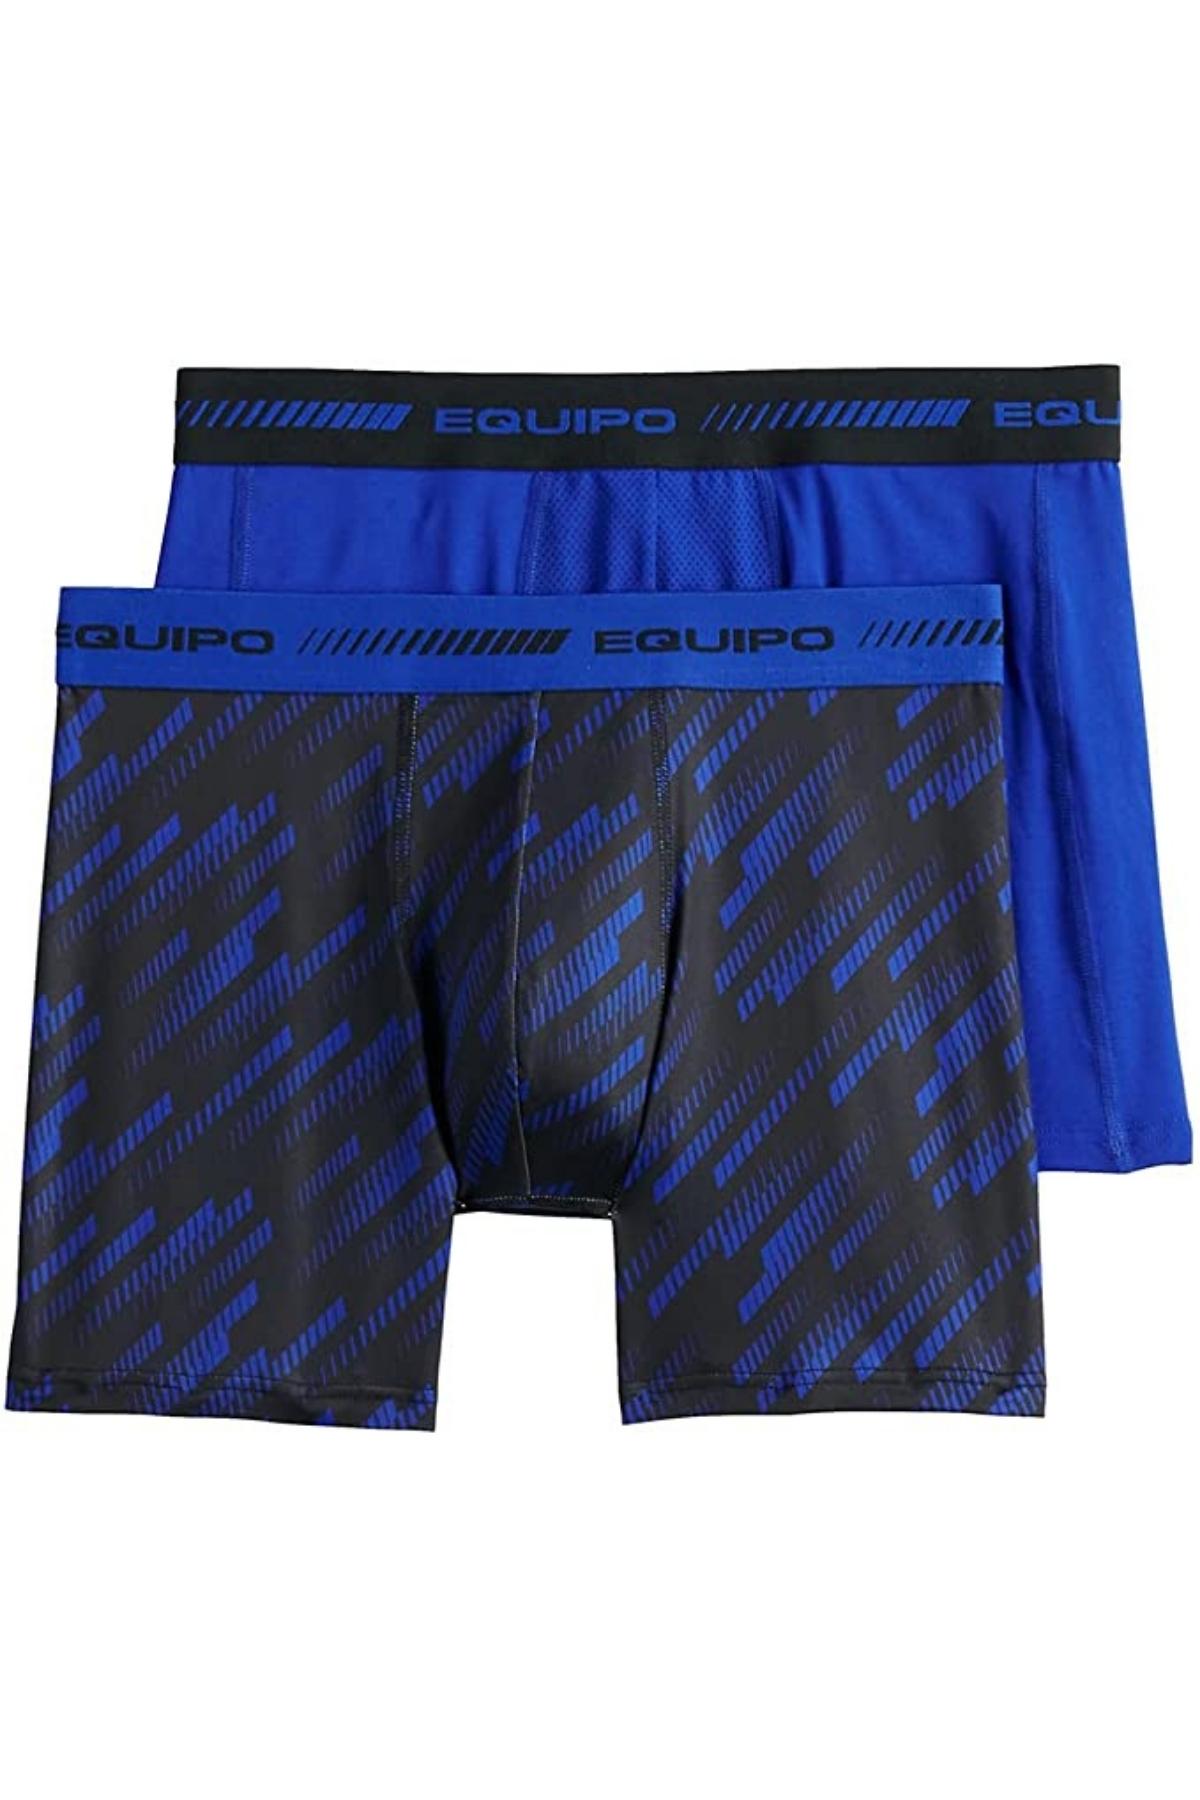 Equipo Blue and Diagonal Lines Quick Dry Performace 2-Pack Boxer